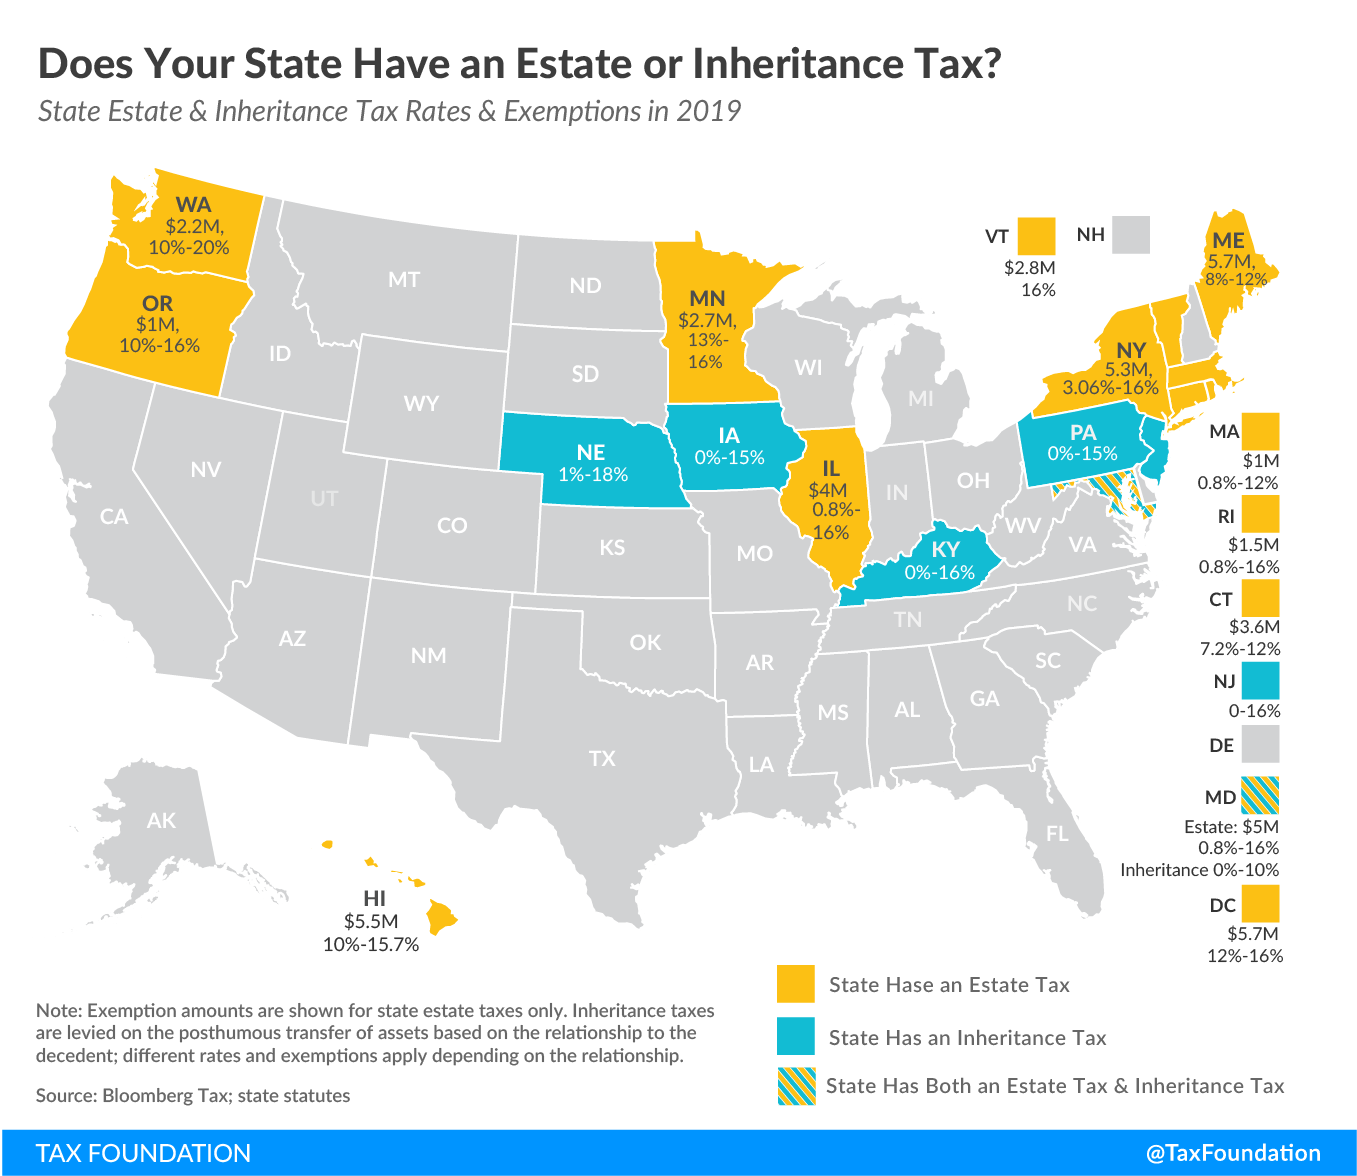 Does Your State Have an Estate or Inheritance Tax? state estate tax 2019, state inheritance tax 2019, does my state have an estate tax? does my state have an inheritance tax? state estate taxes, state inheritance taxes